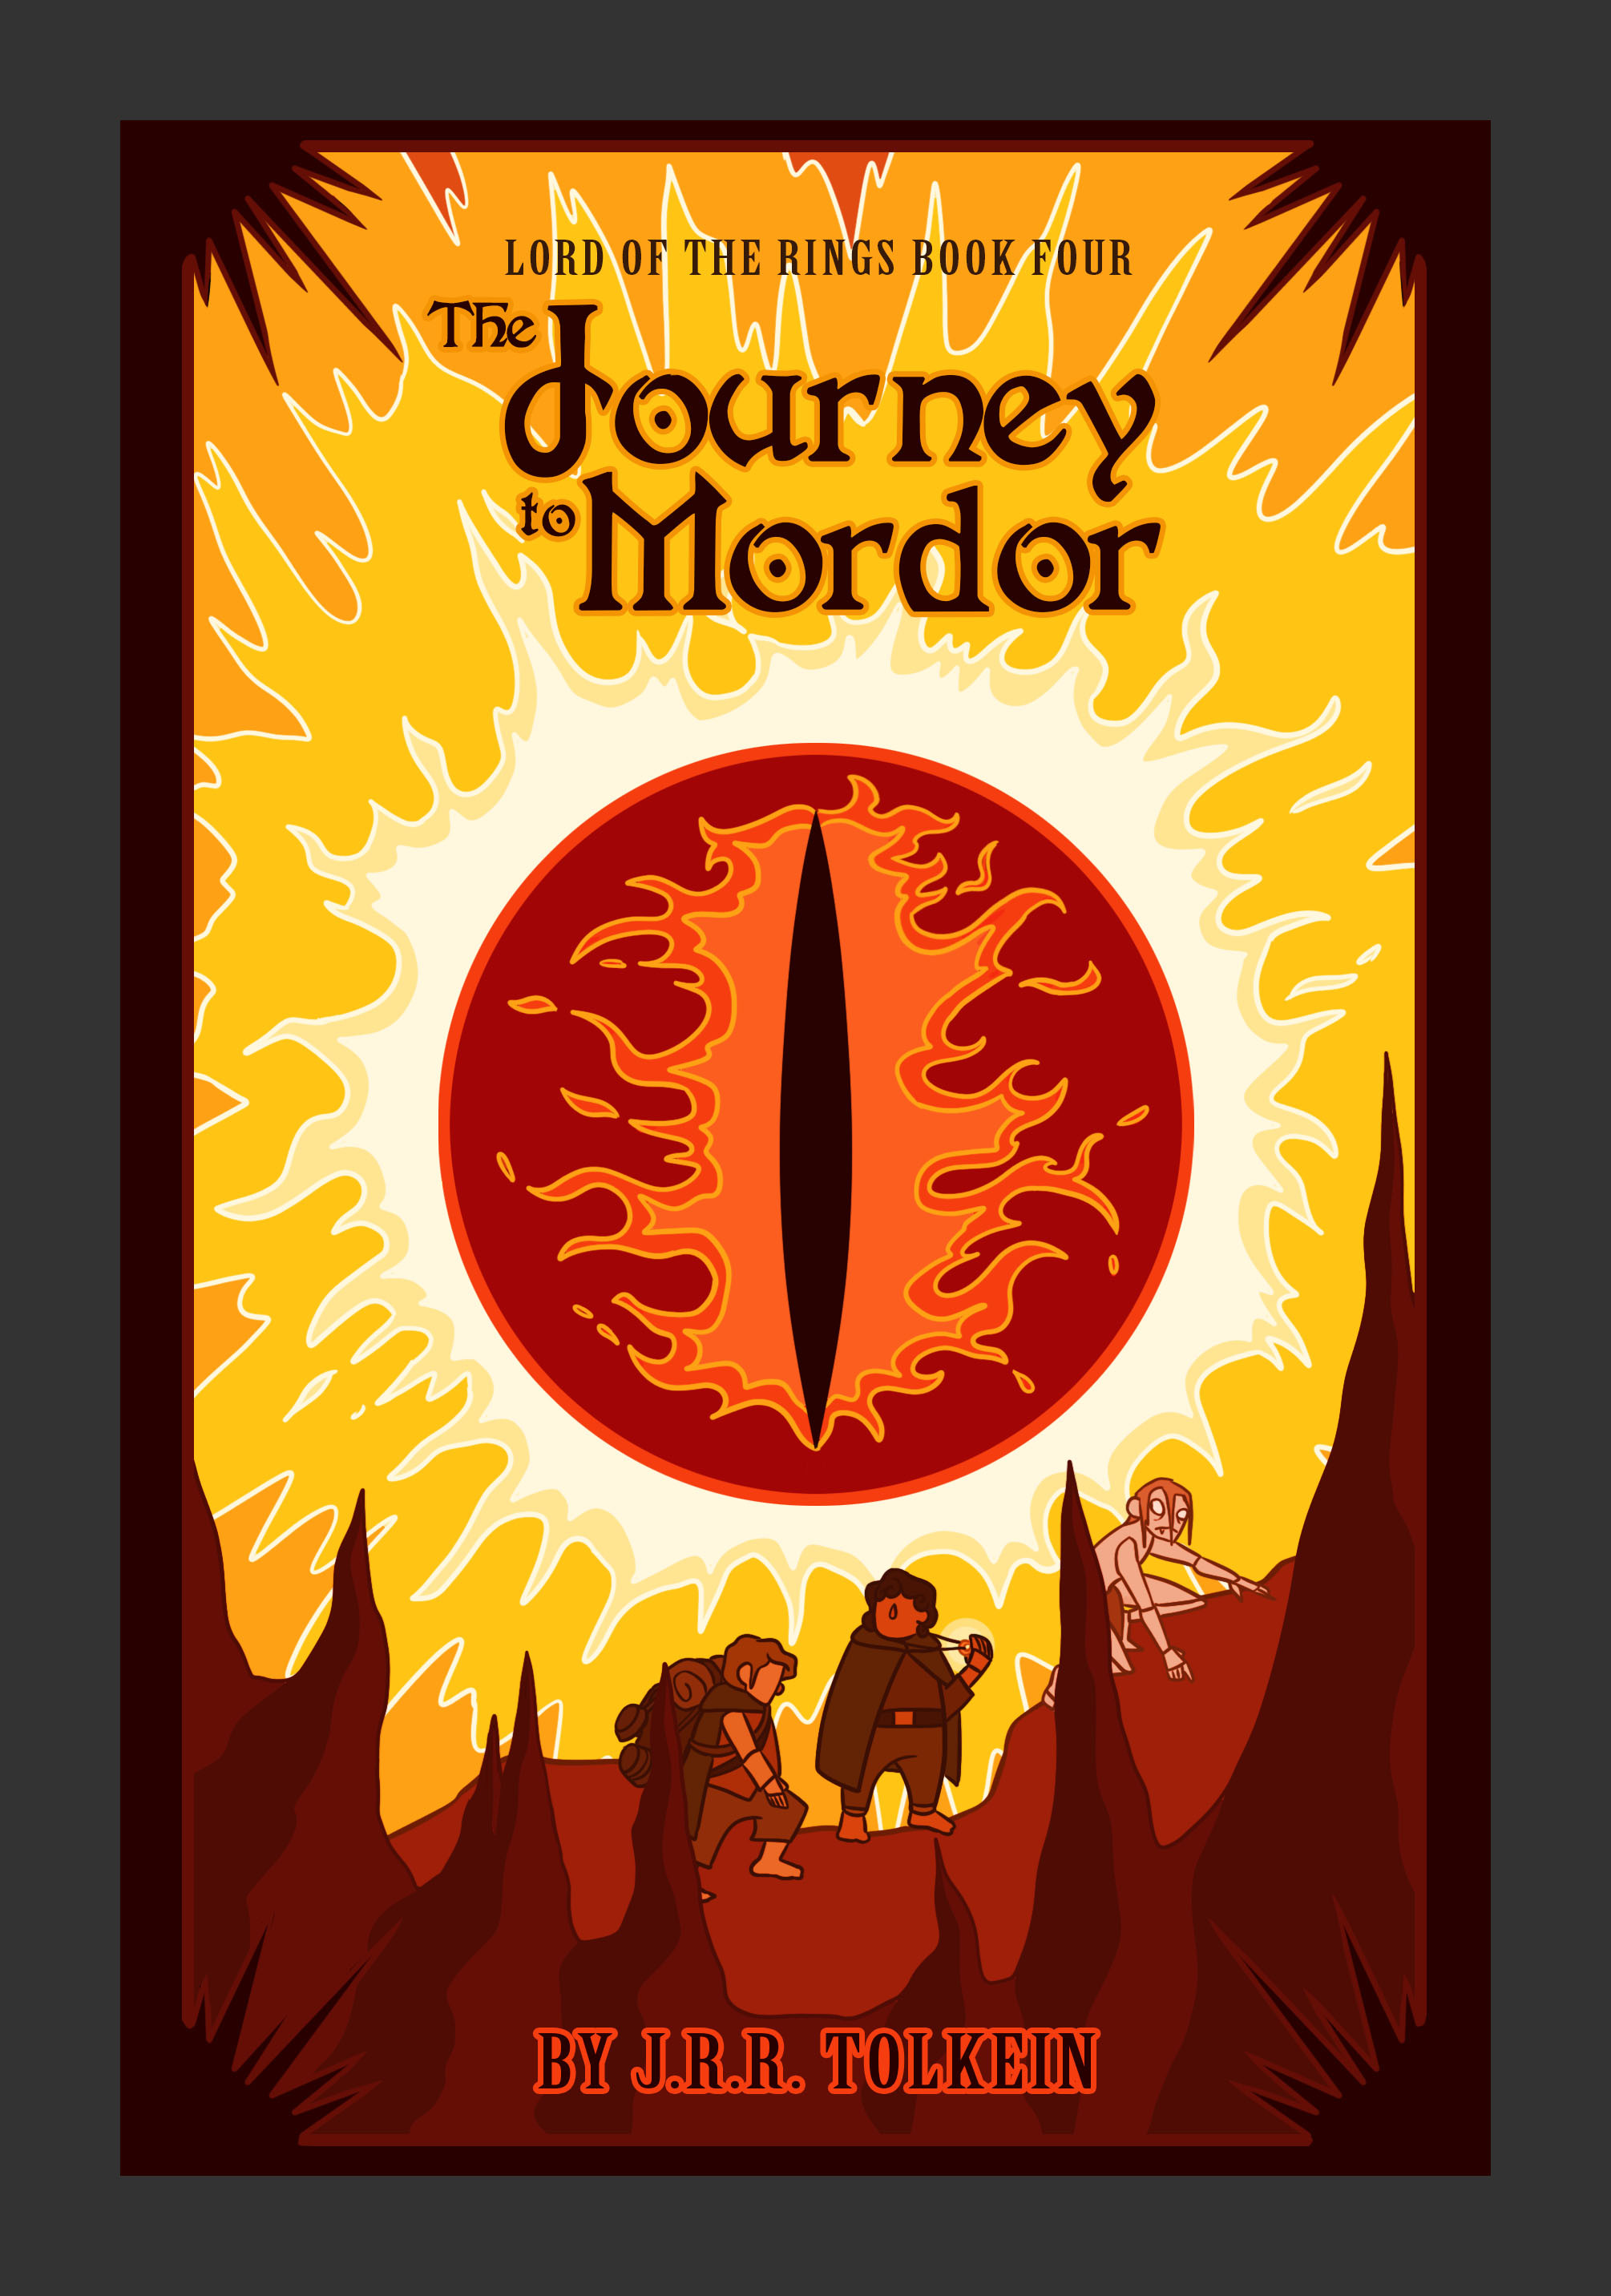 Cover for book four: The Journey to Mordor (second half of The Two Towers)